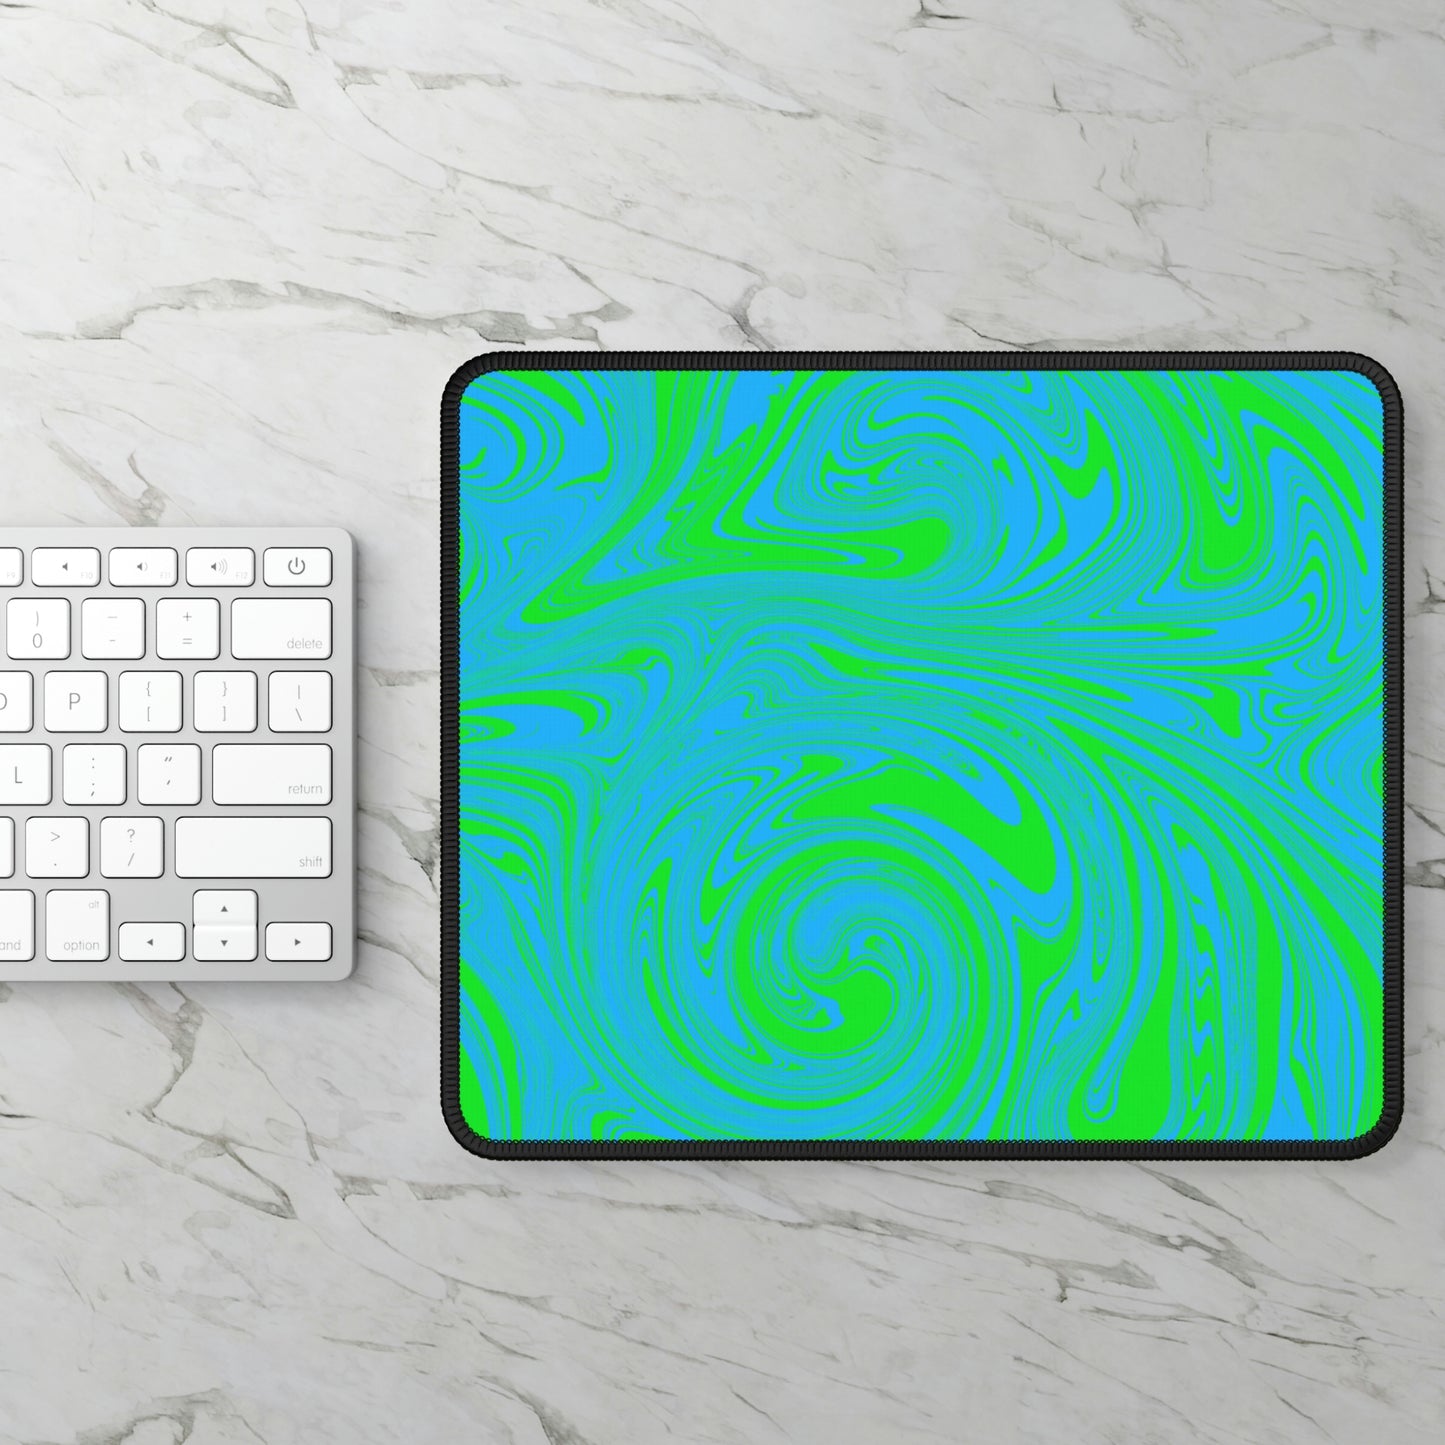 A gaming mouse pad with blue and green swirls sitting next to a keyboard.